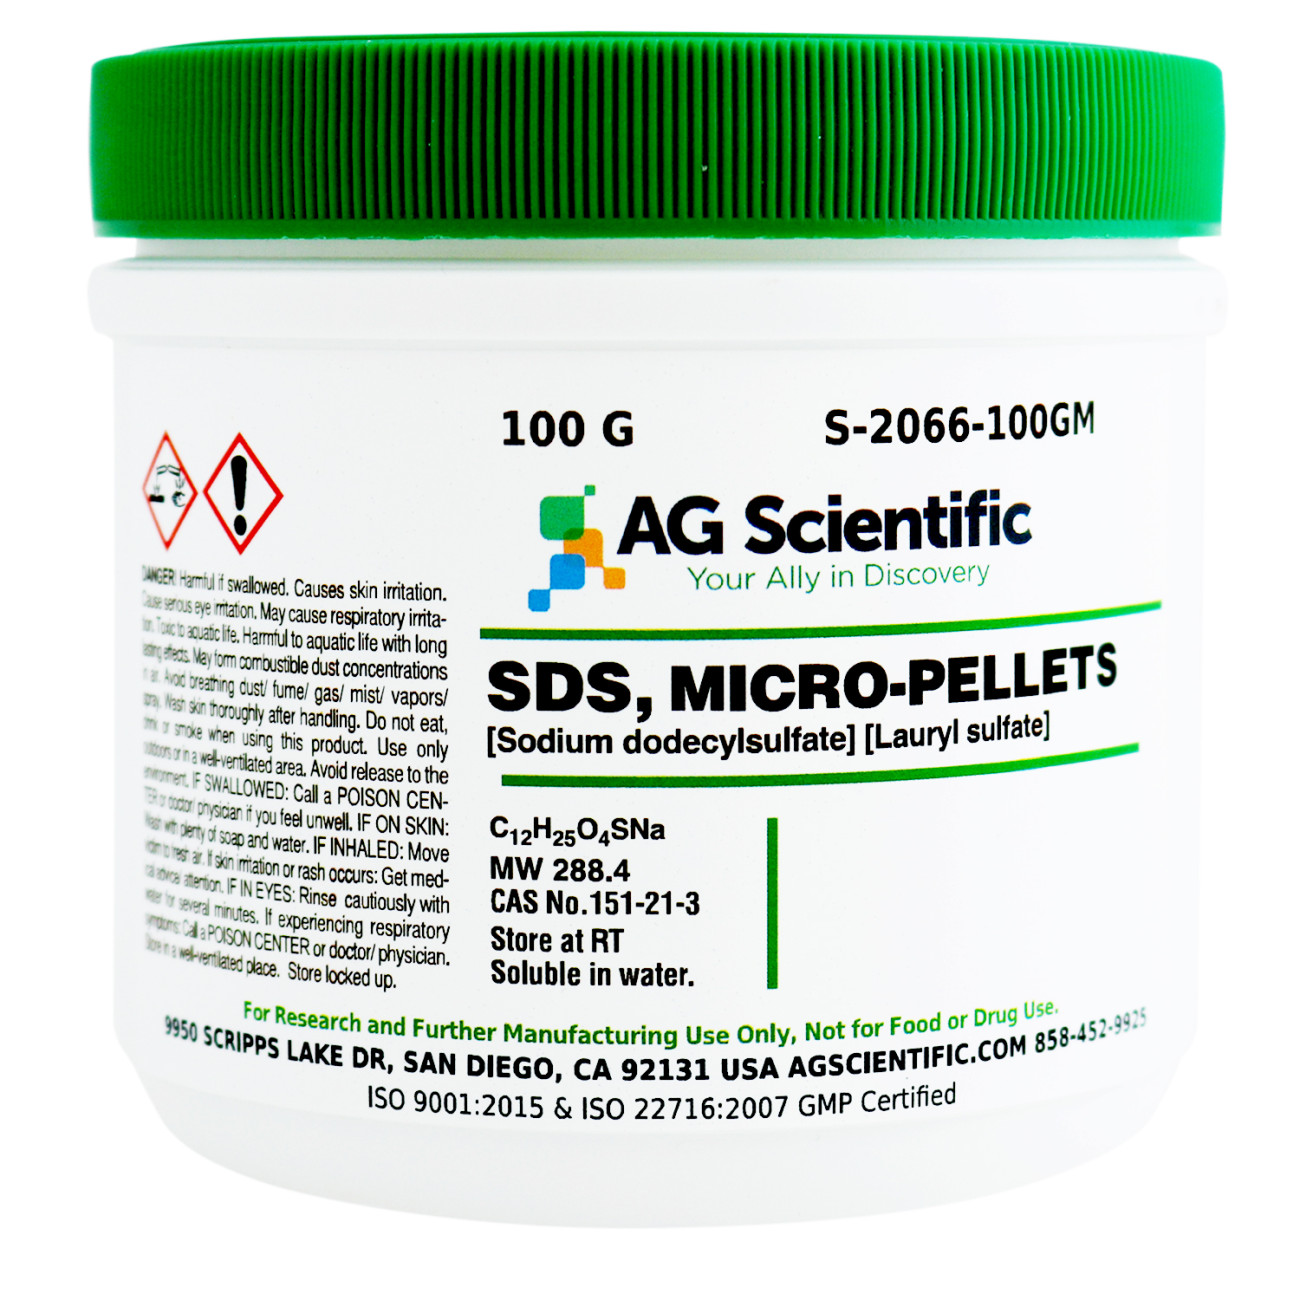 SDS [Sodium Dodecyl Sulfate], Micro-Pellets, 100 G